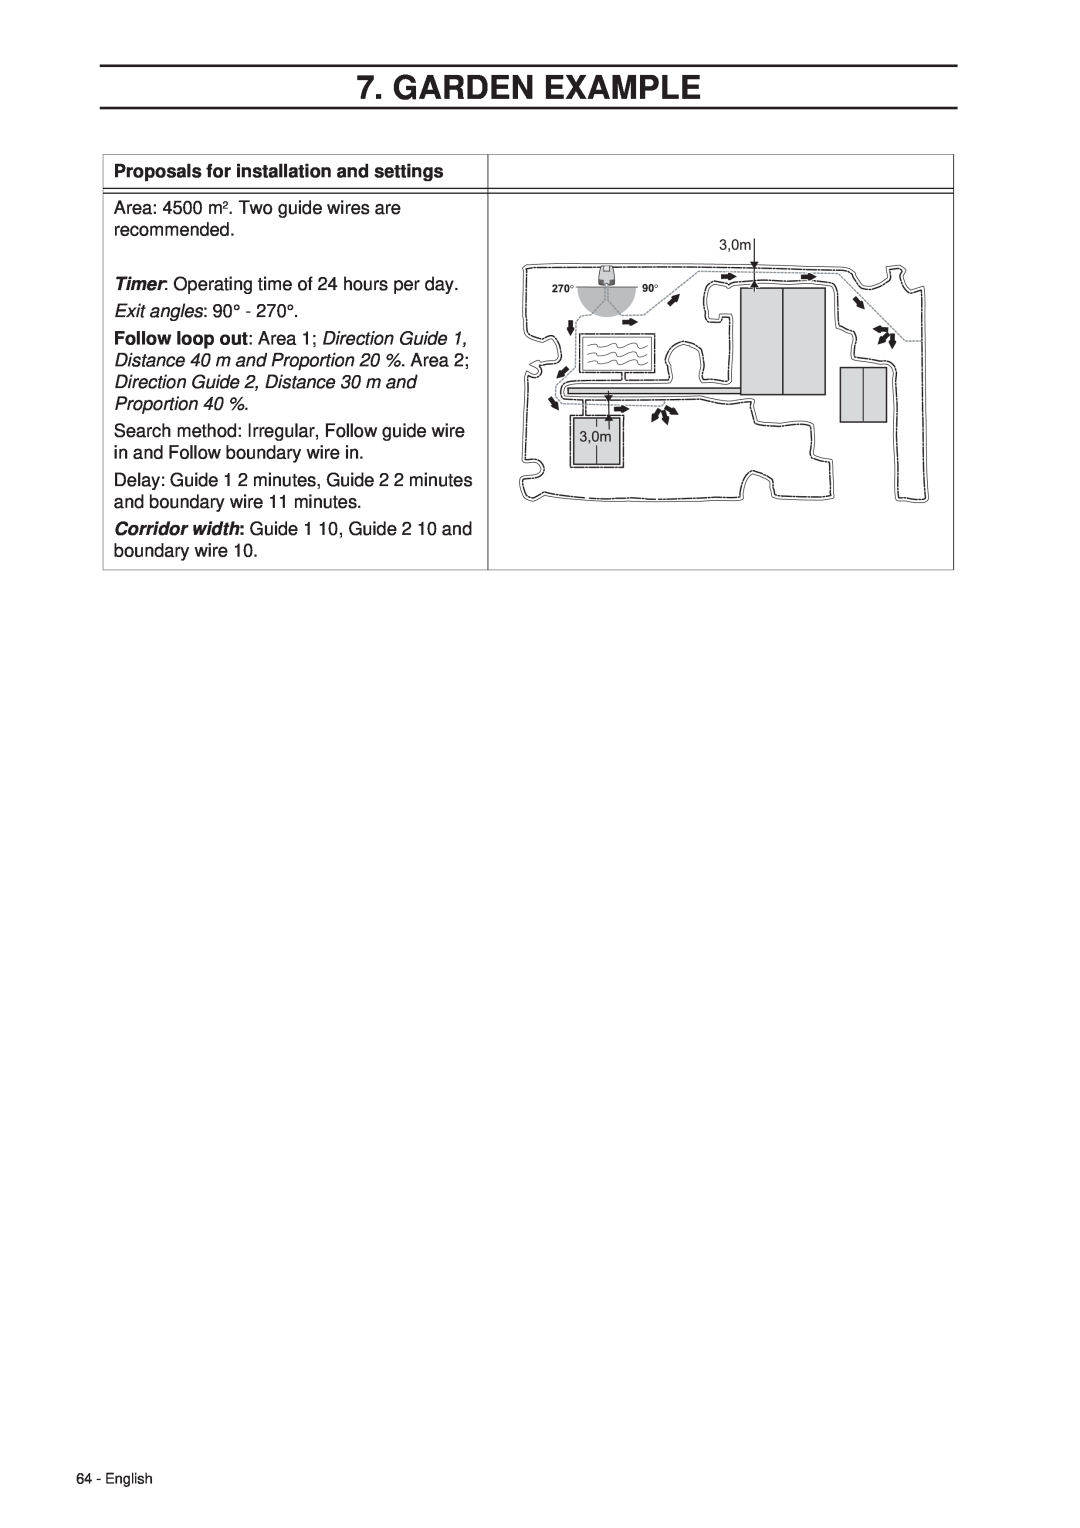 Husqvarna 260 ACX Garden Example, Proposals for installation and settings, Area 4500 m2. Two guide wires are recommended 